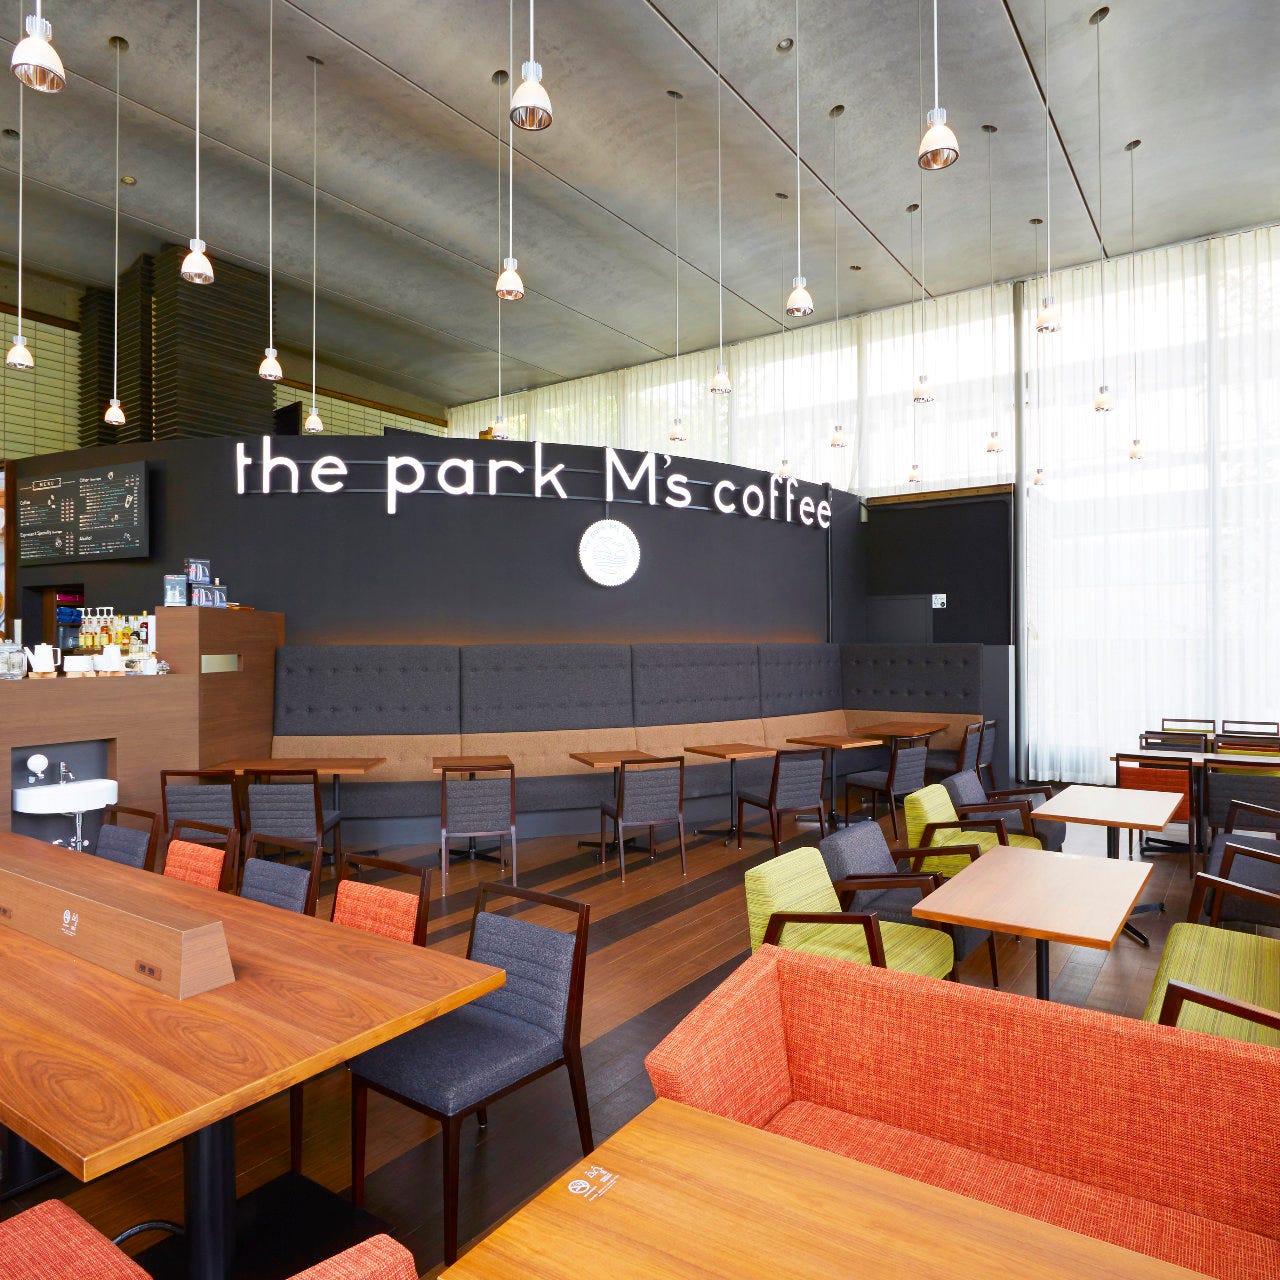 the park M’s coffee